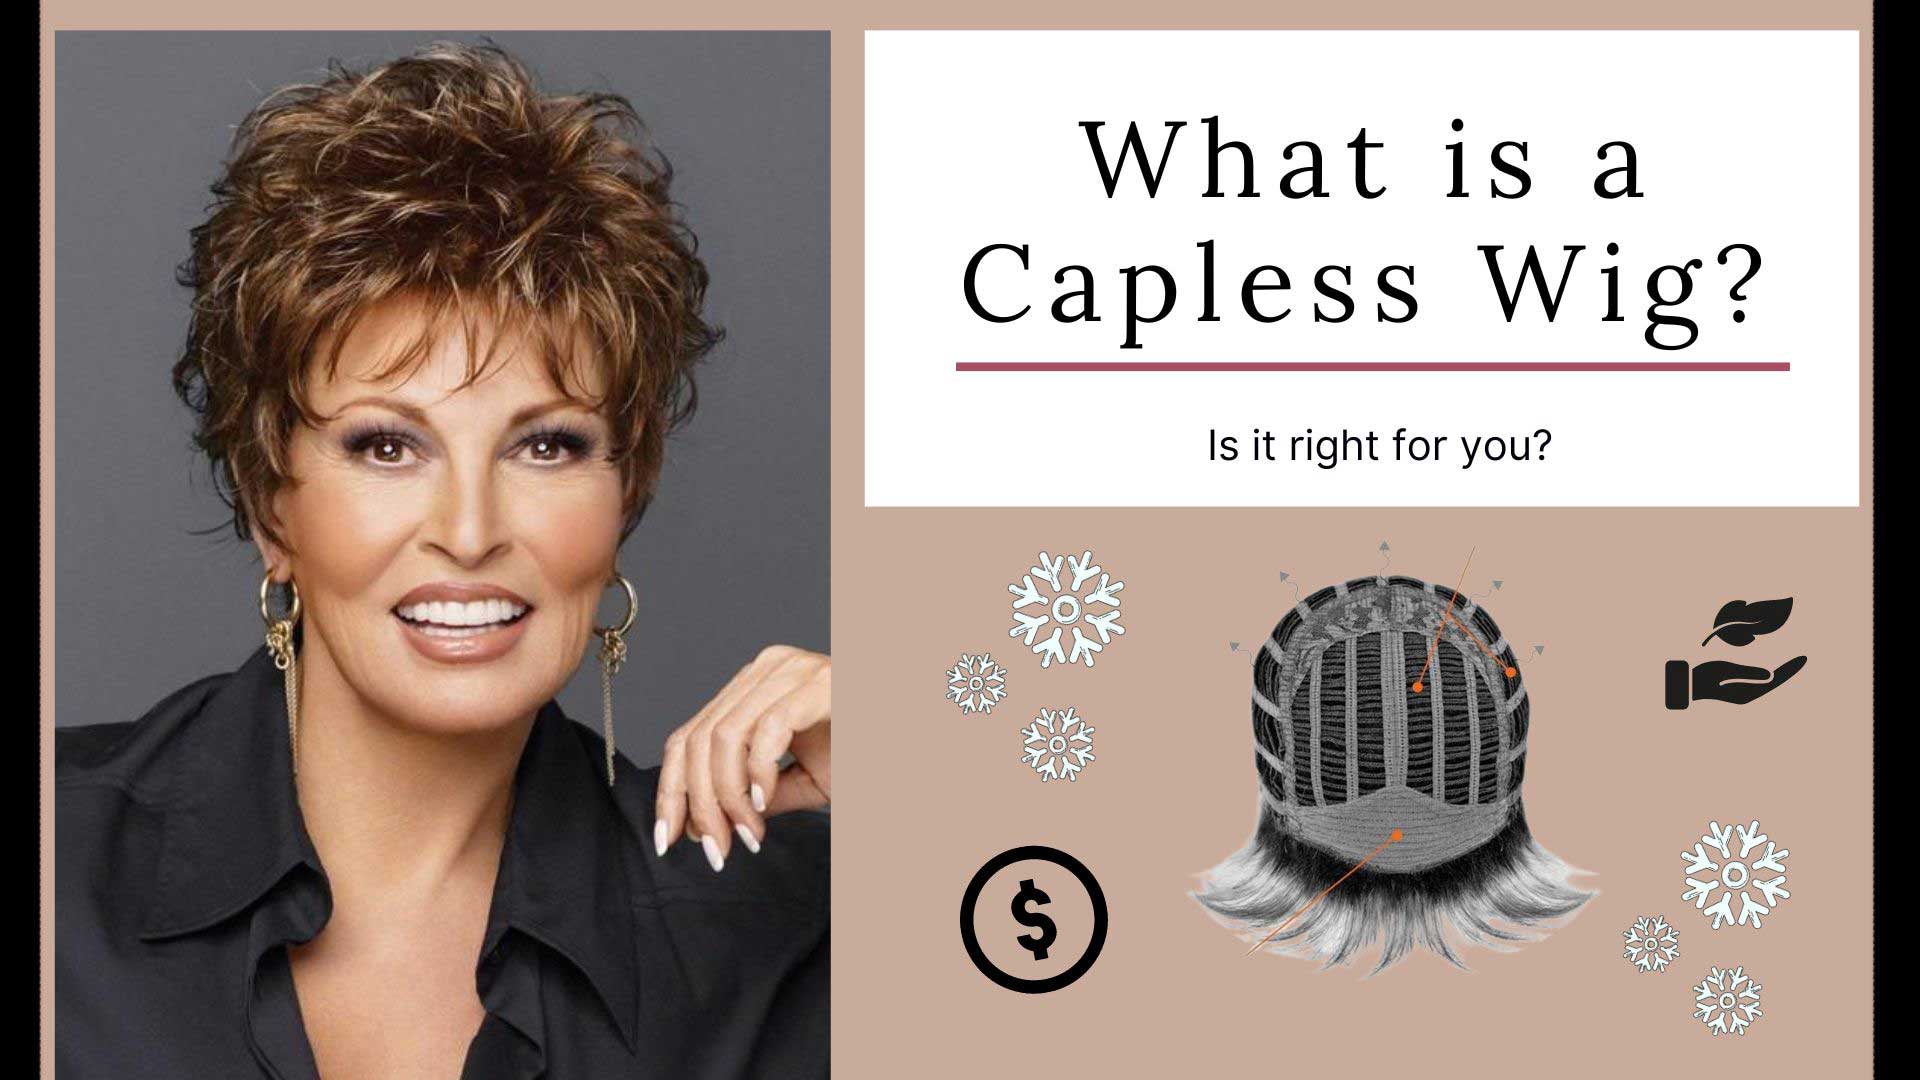 What is a Capless Wig?